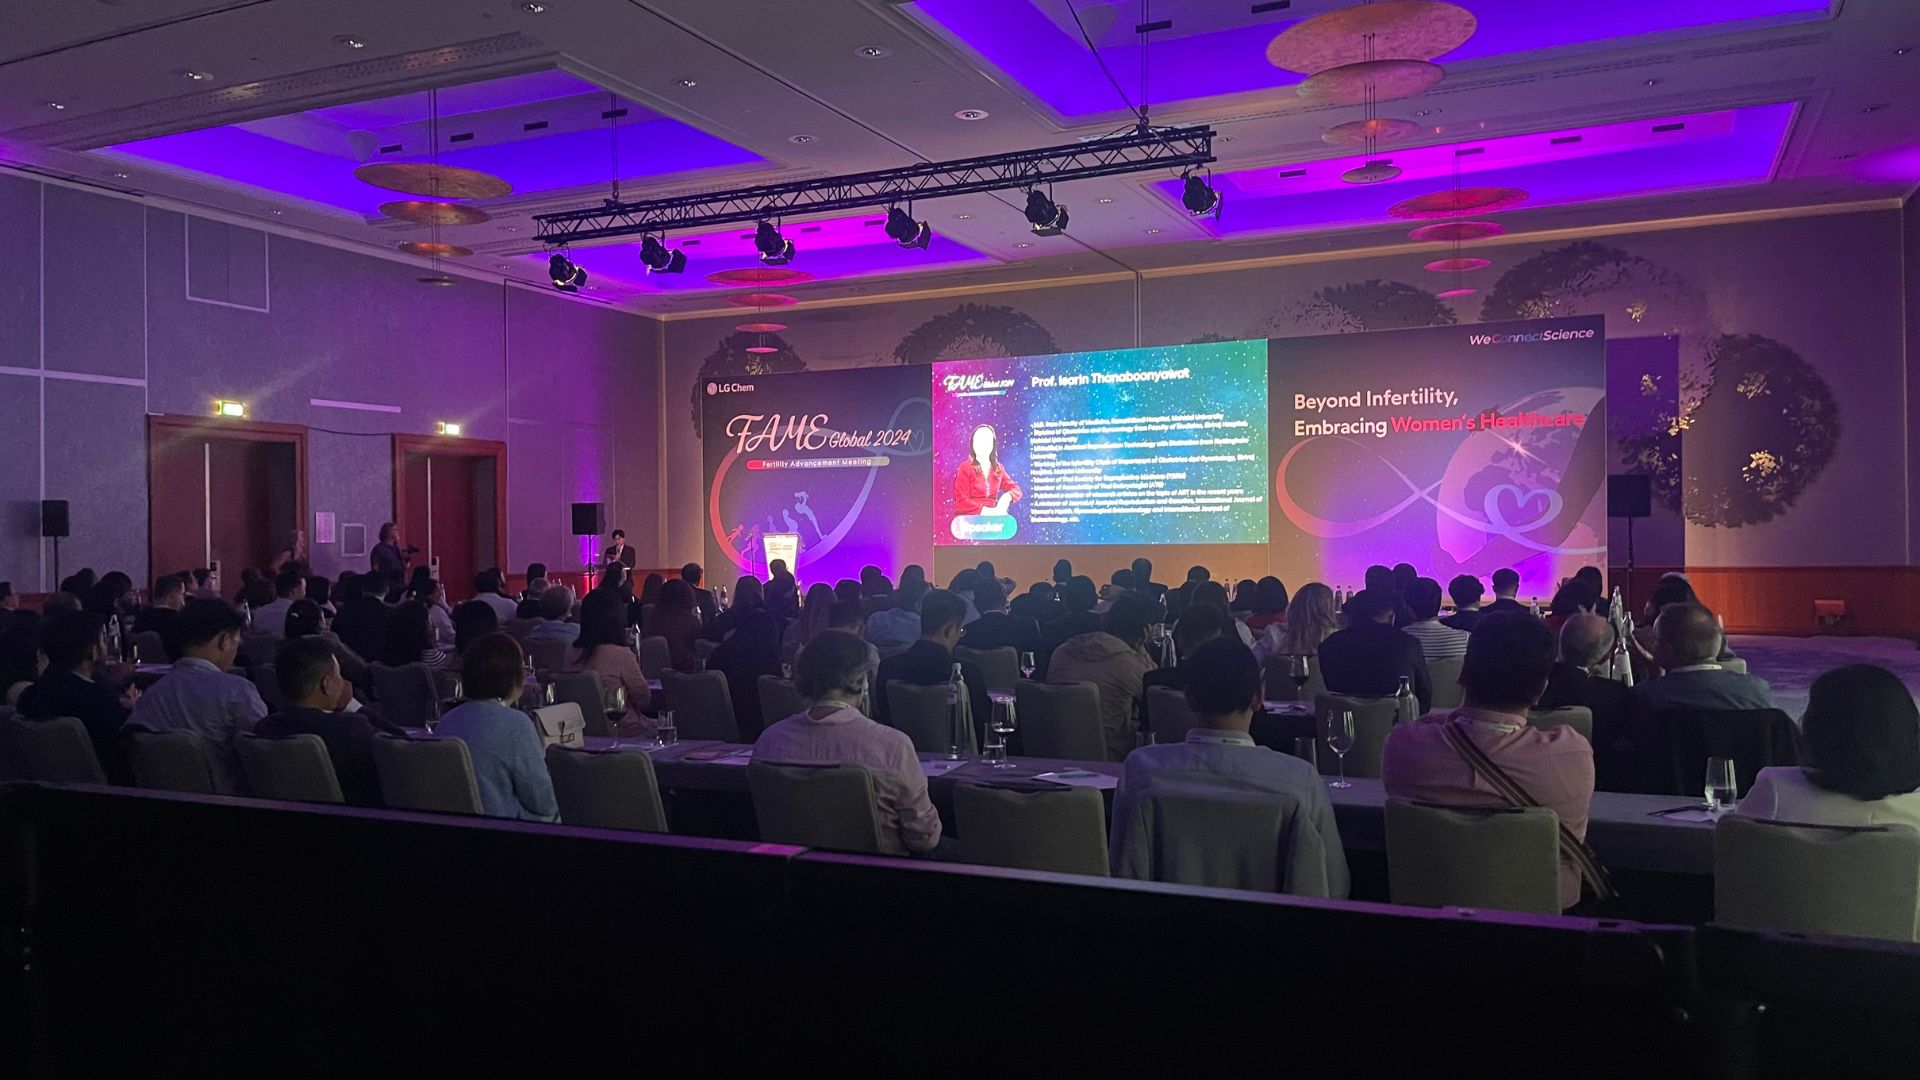 global view of the medical conference room including classroom tables for 130 pax a 17 meters stage a 5,5 meters LED screen and beautiful purple lighting